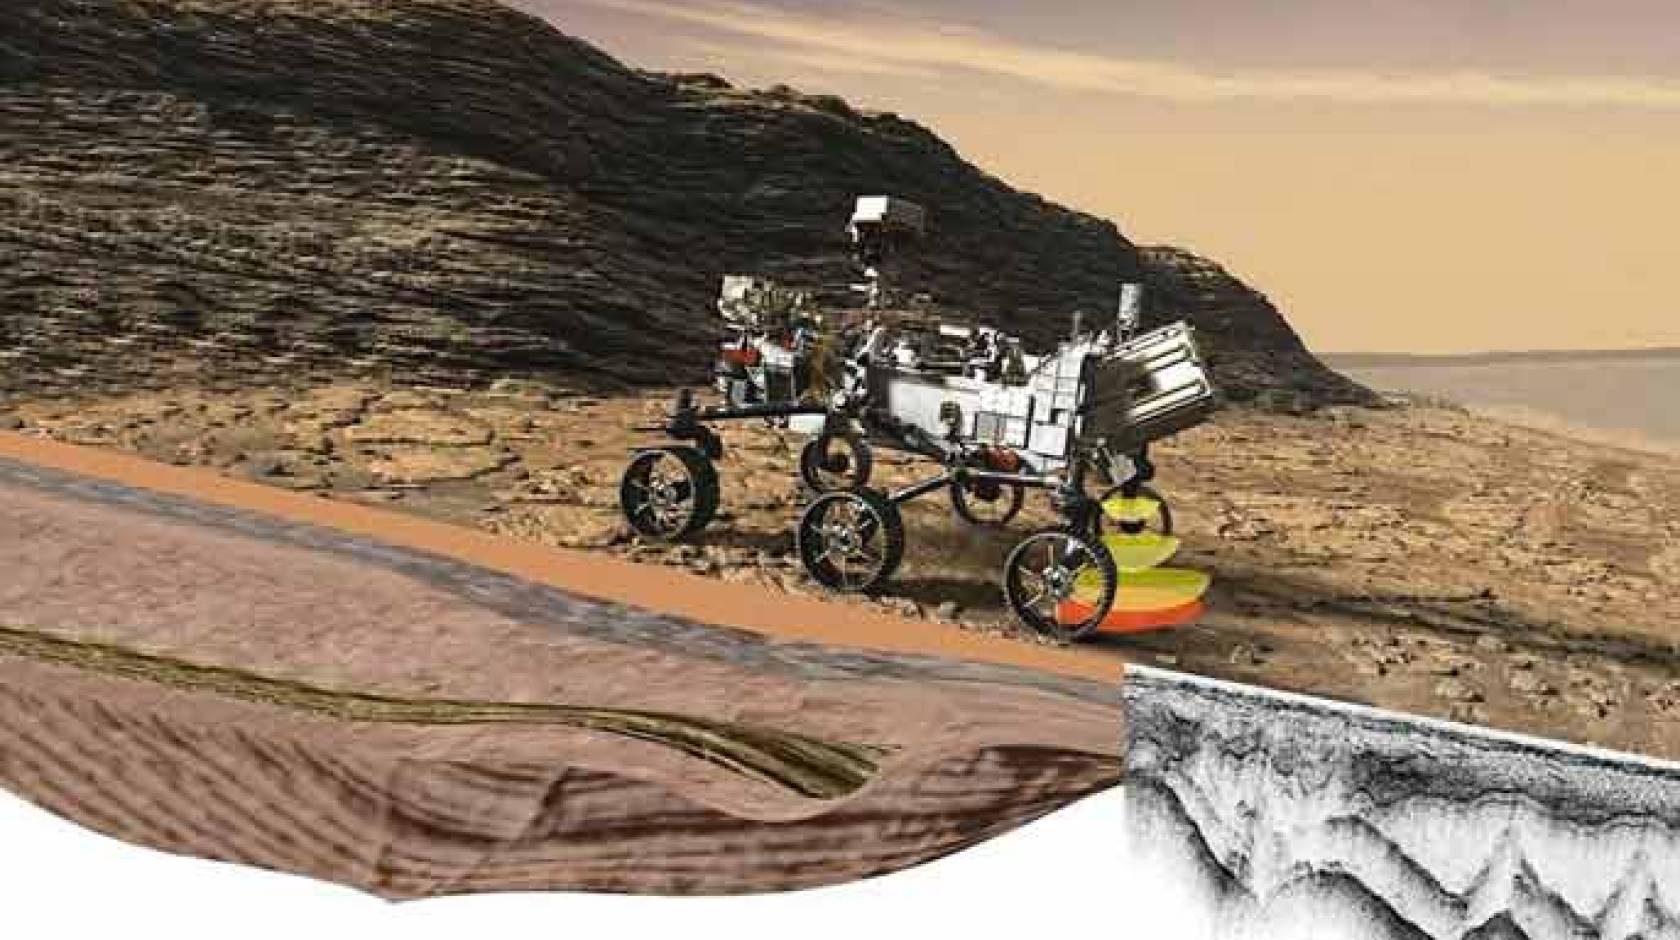 Rendering of the NASA Perseverance rover on Mars